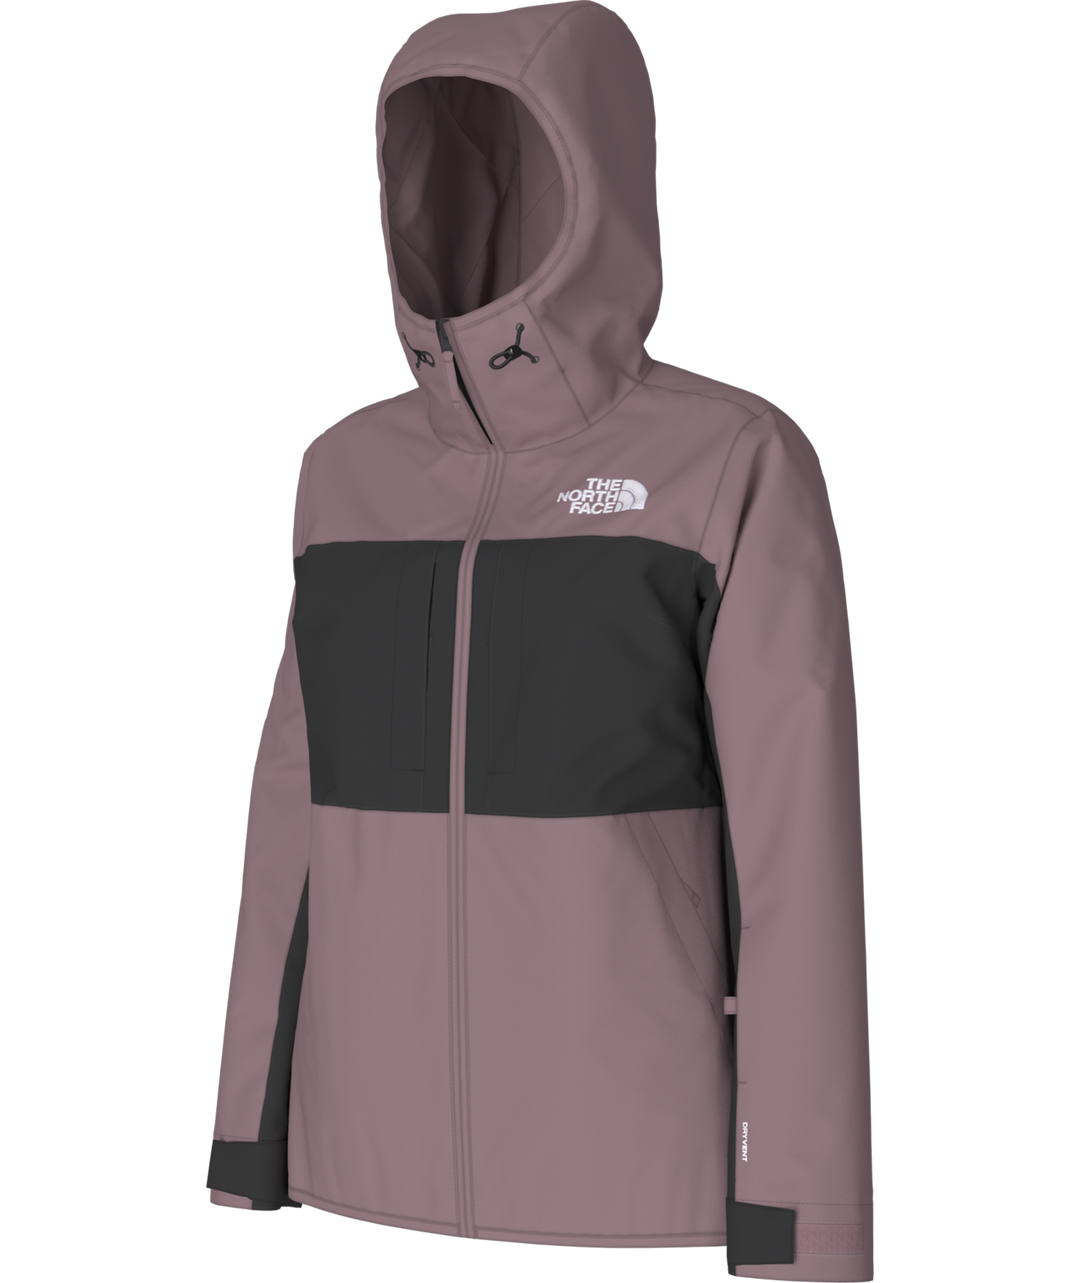 The North Face Women's Namak Insulated Jacket Fawn Grey